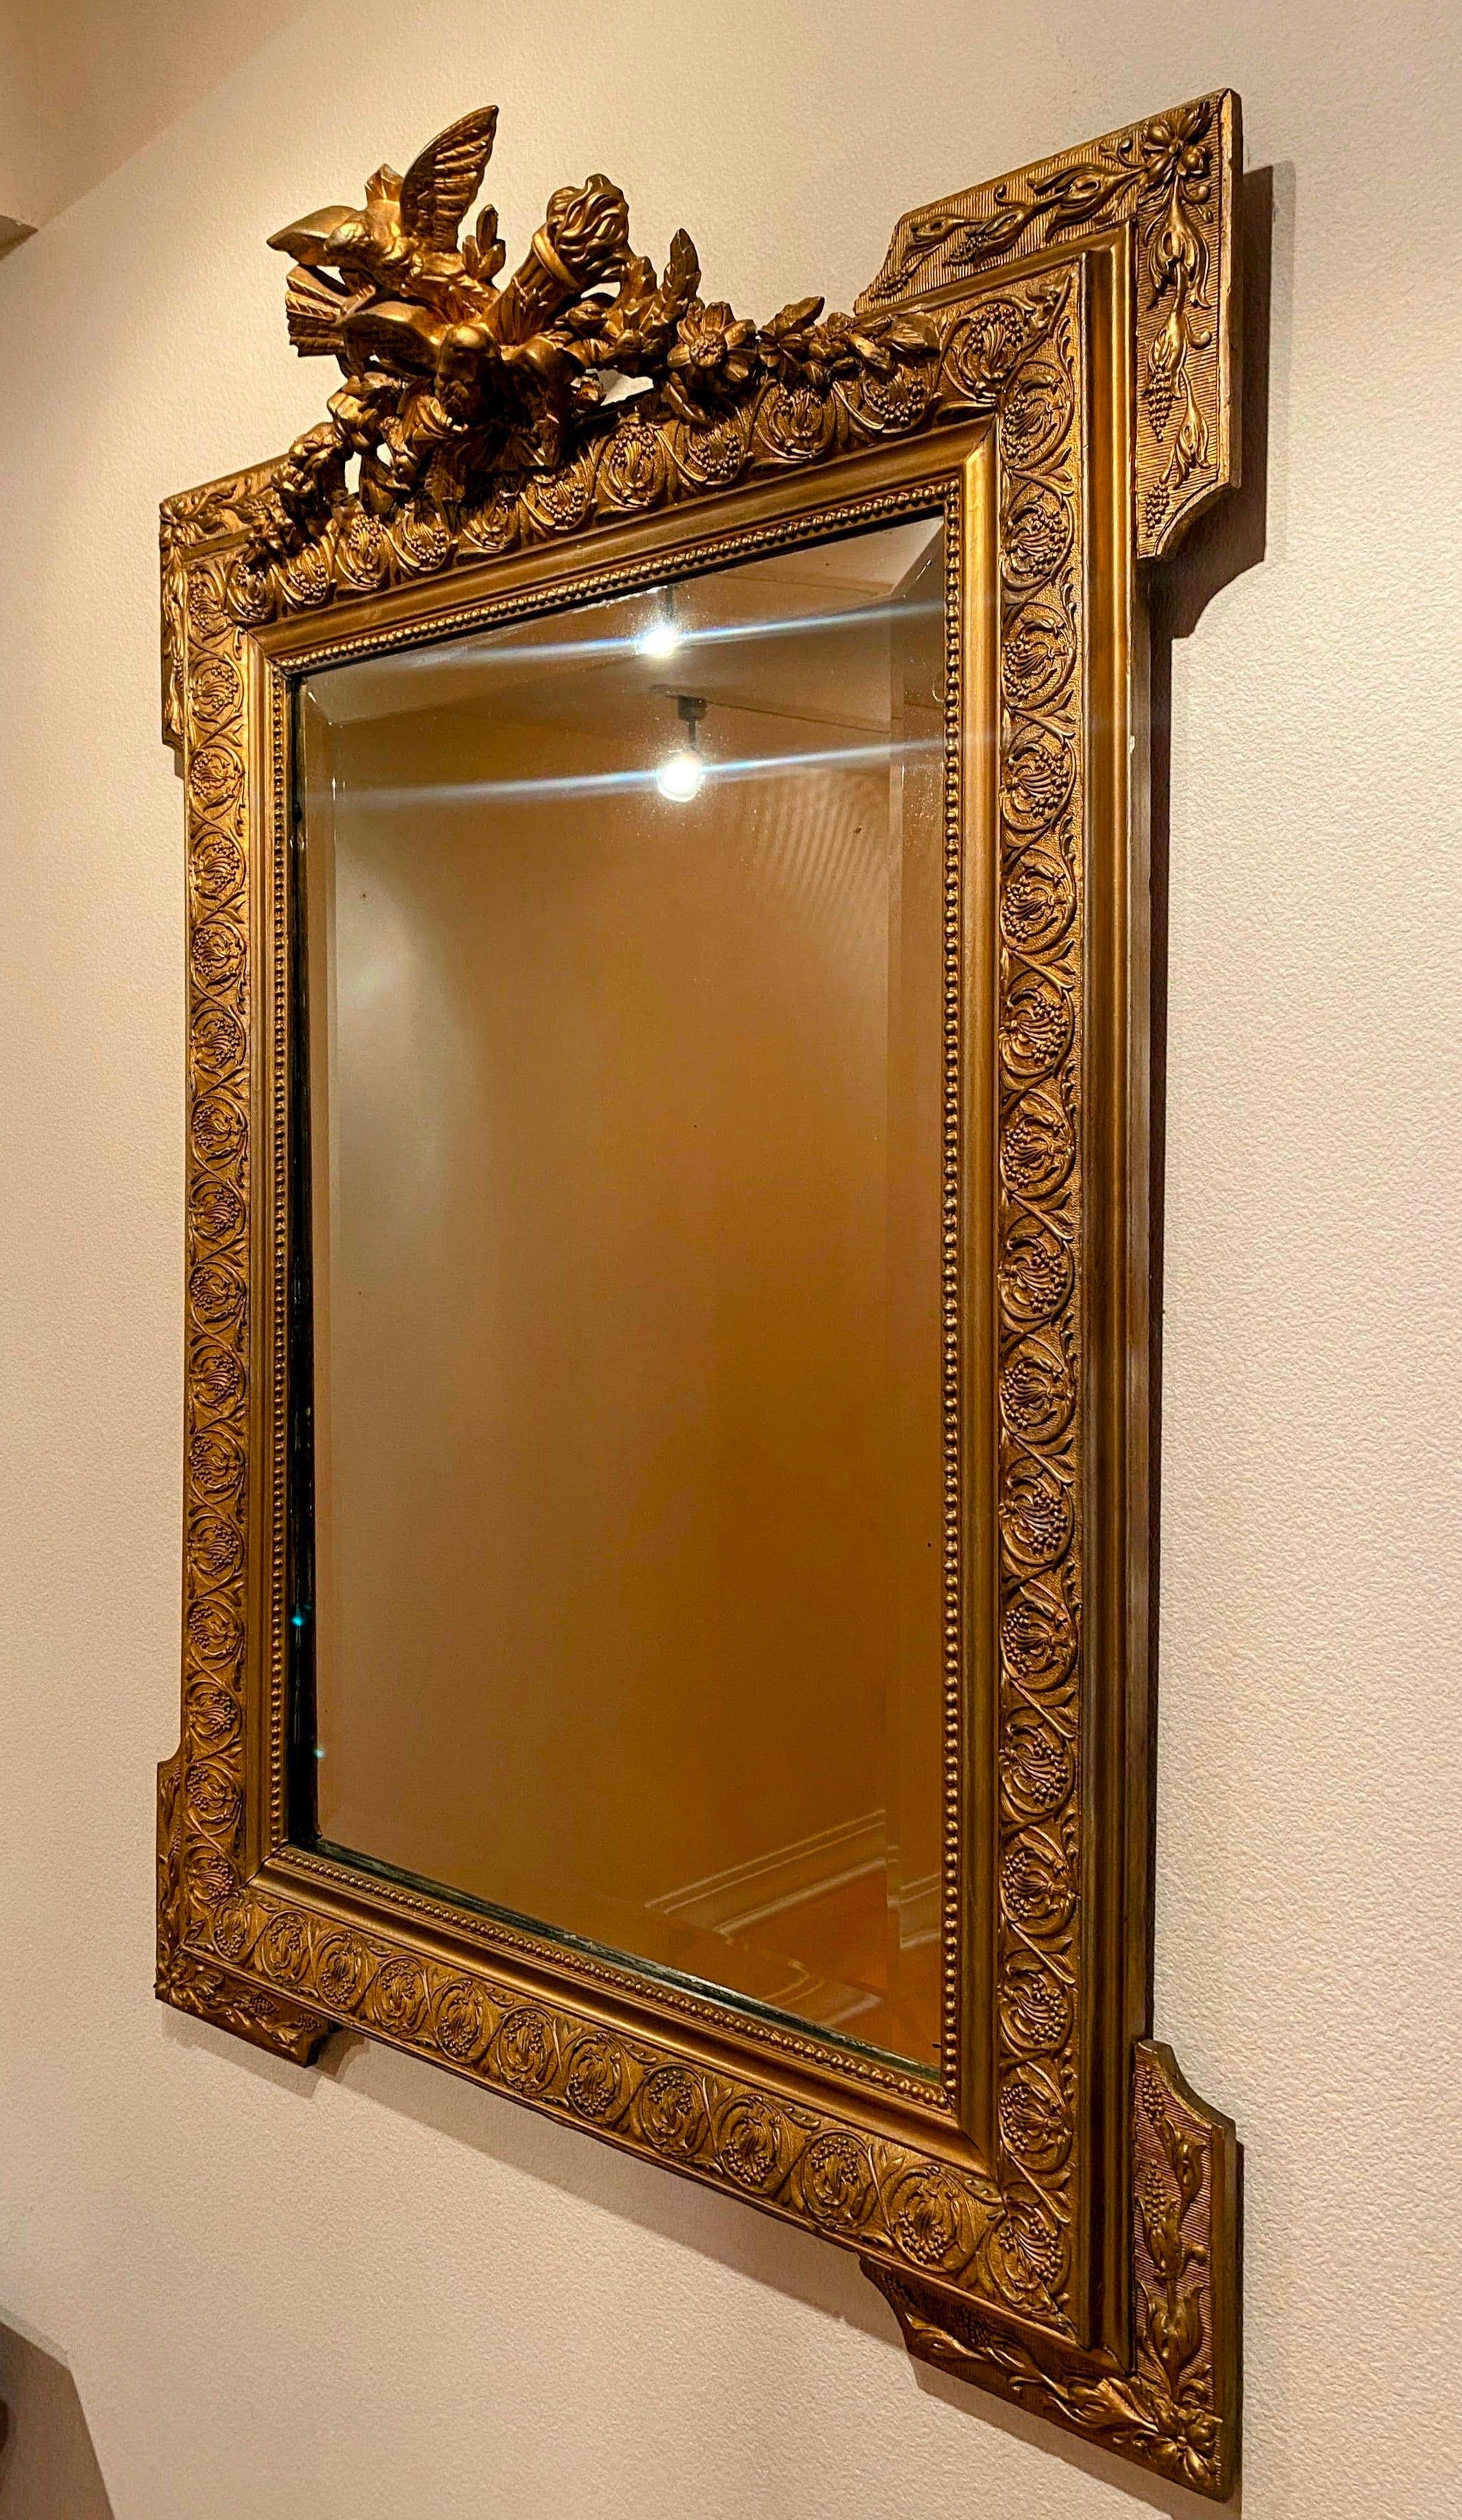 Antique French Gold Mirror. Ornate Gilt and plaster wall mirror, craved gilt eagle on top. Touched up with gold paint later.

Dimensions
29